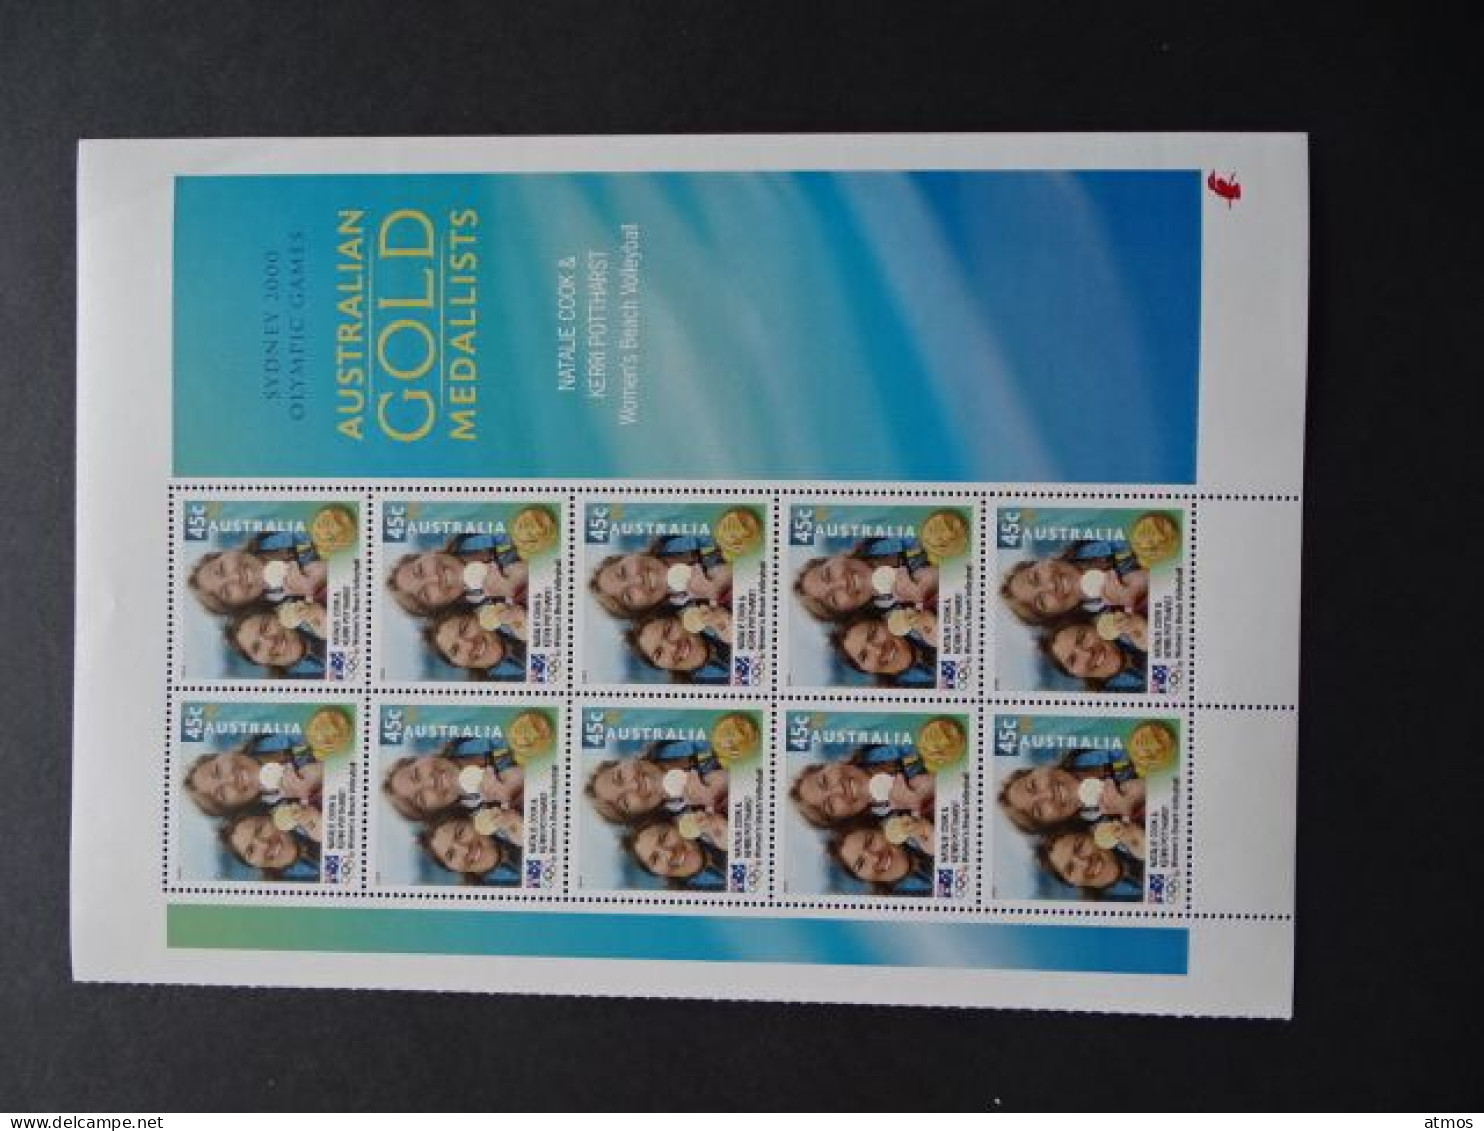 Australia MNH Michel Nr 1983 Sheet Of 10 From 2000 ACT - Mint Stamps